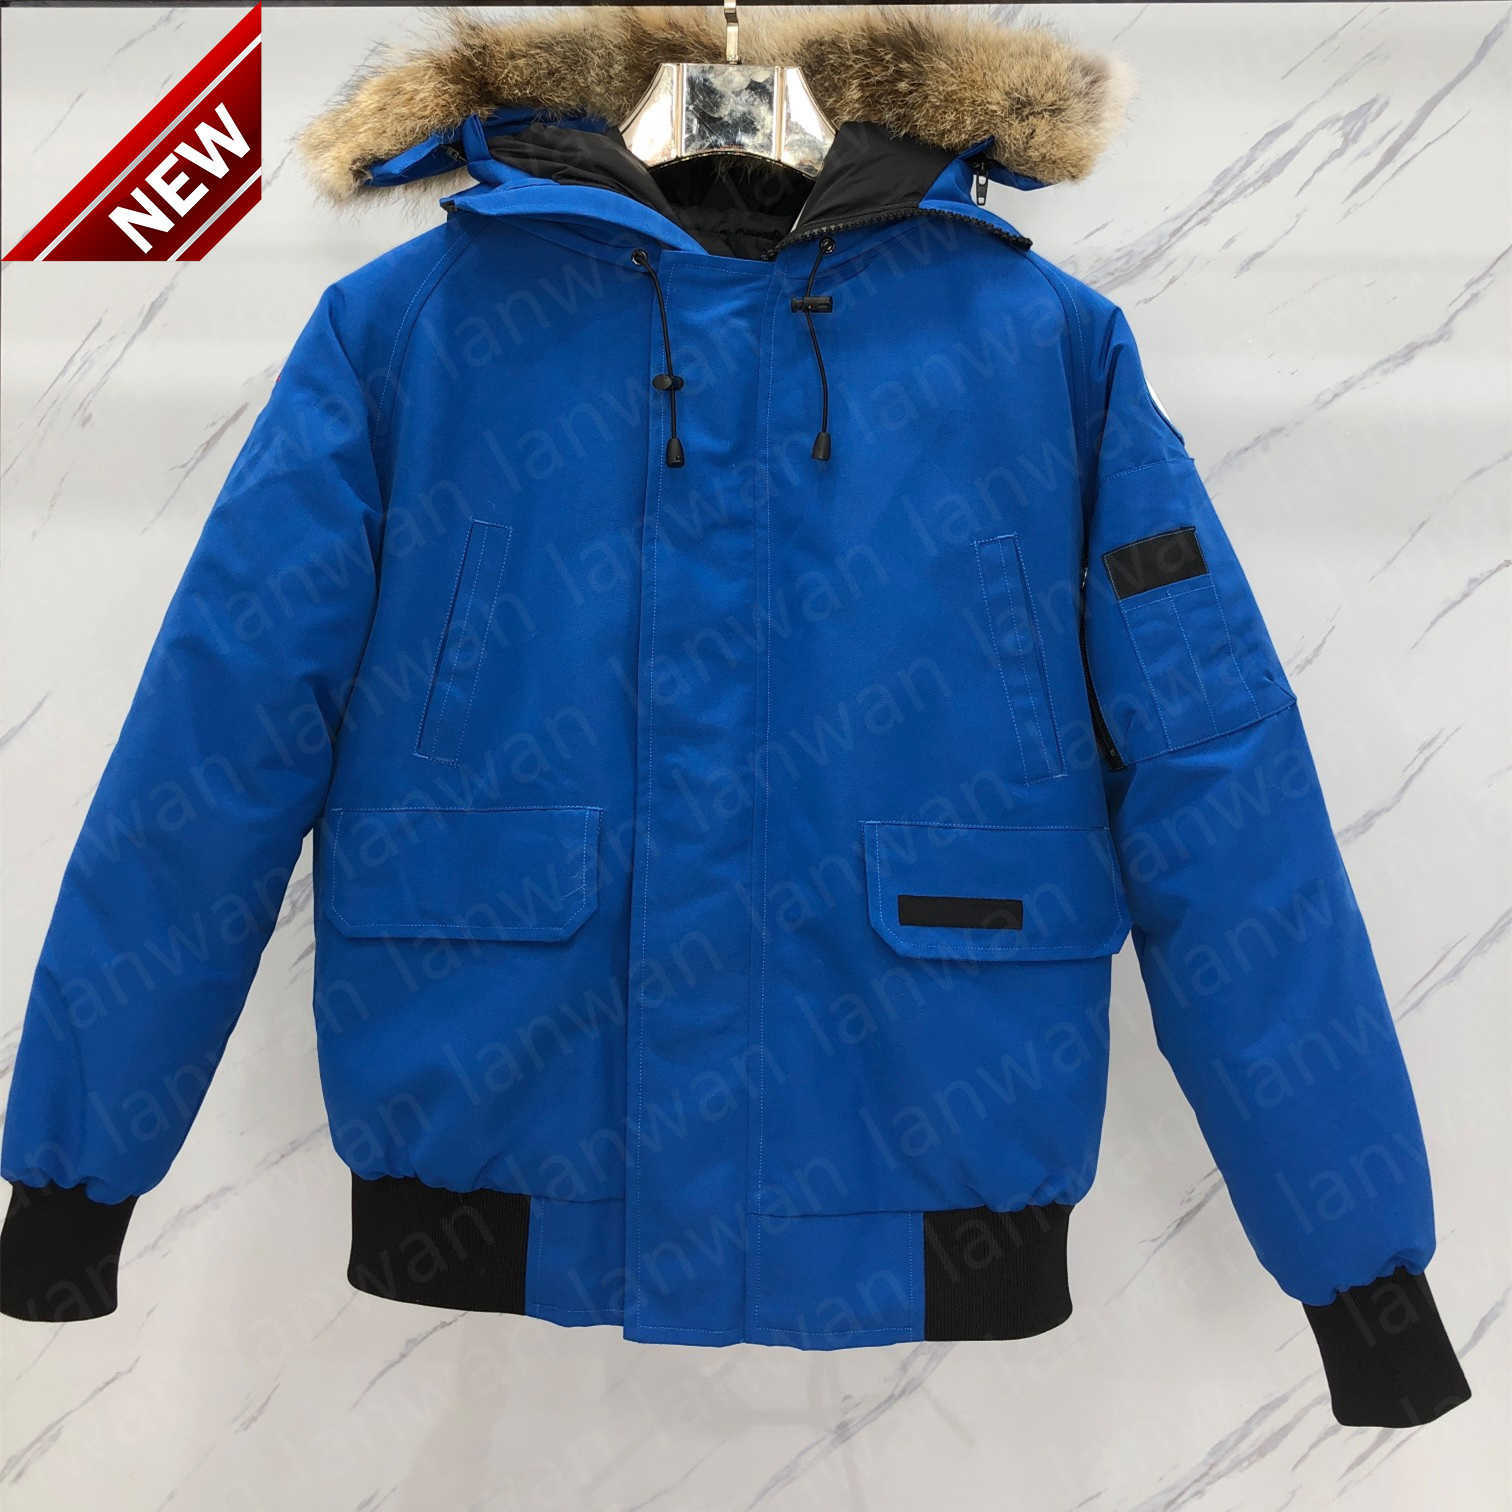 

2022 Mens Down Jacket Winter Cold Coats Parkas Outerwear Protection Windproof Fashion Warm Coat With Fur Keep Ccomfortable Thicken Bomber Jackets, Customize